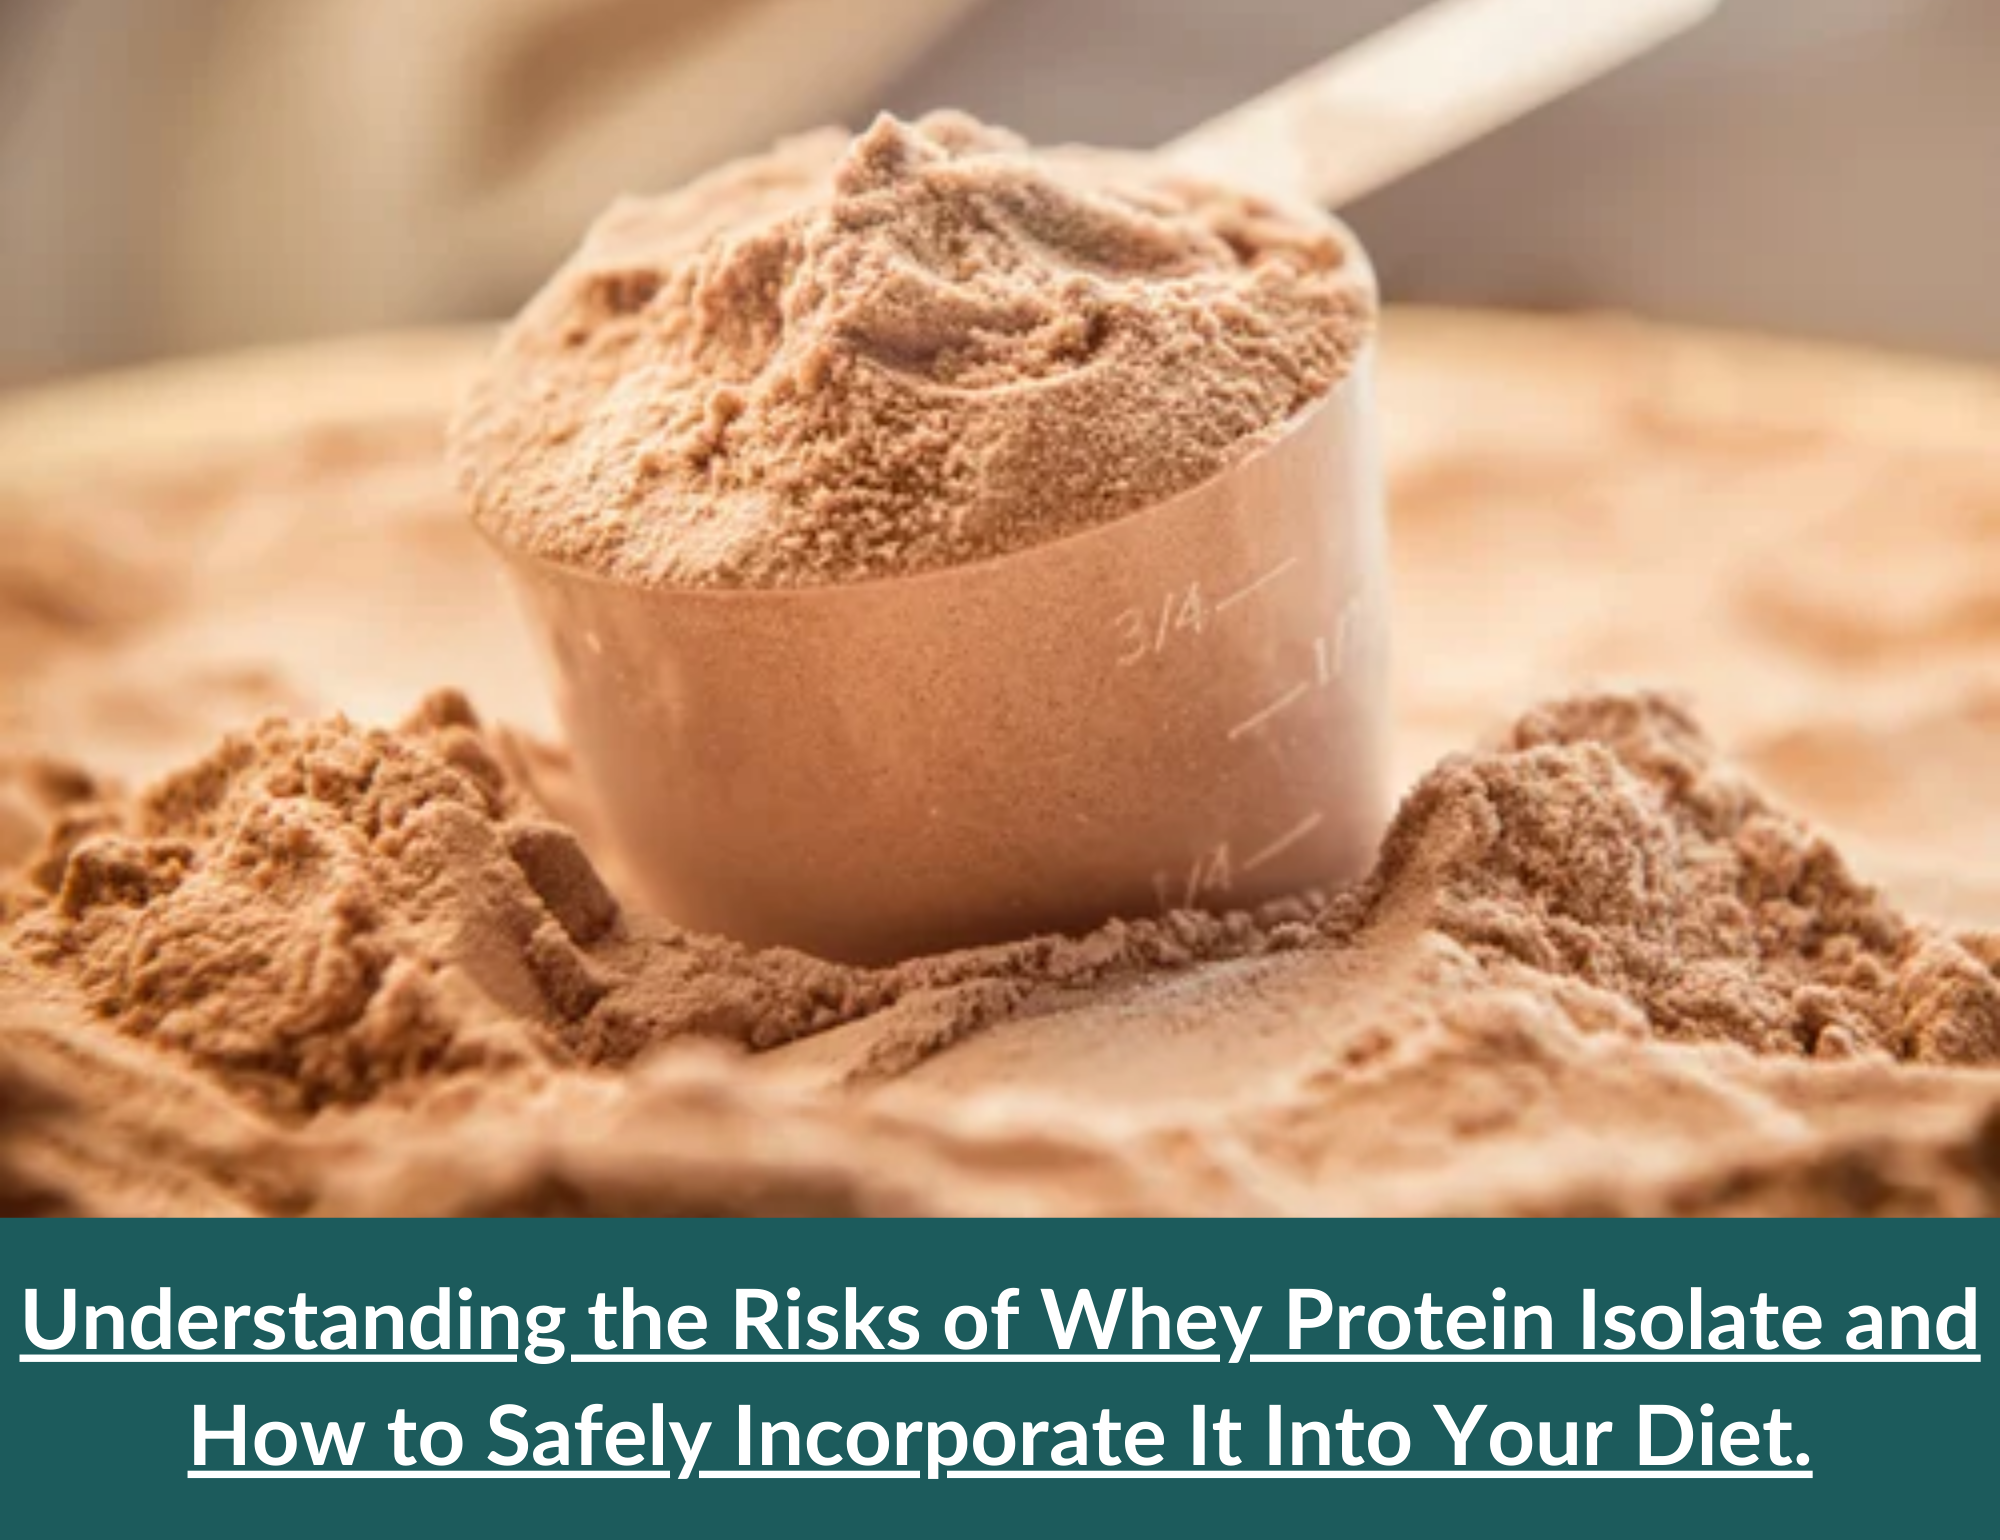 Understanding the Risks of Whey Protein Isolate and How to Safely Incorporate It Into Your Diet.